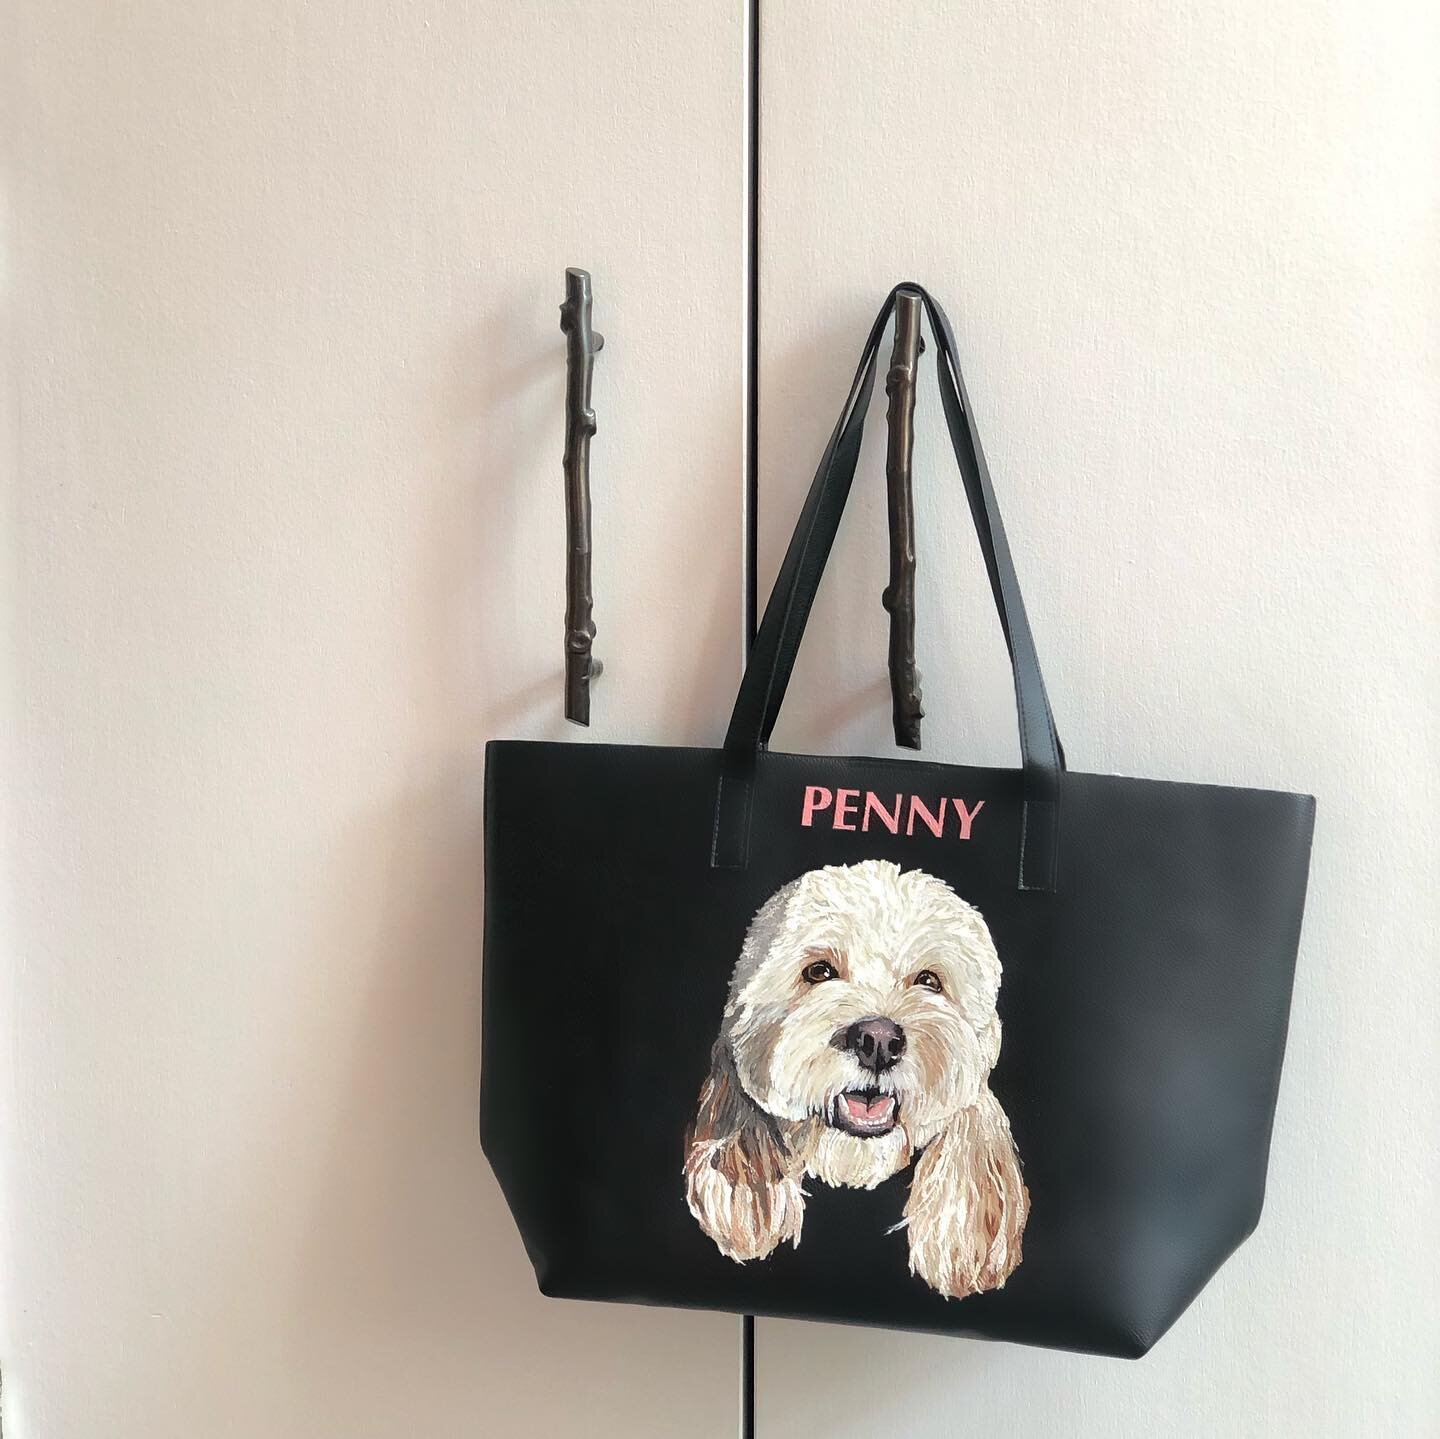 Another day, another #P&ecirc;t&agrave;Portrait #WearableArt #dogs 

#goldendudeleathers #dogsofinstagram #custom #handpainted #veganleather #madeinnyc #doglover #nyc #sustainableart #personalization #dogmom